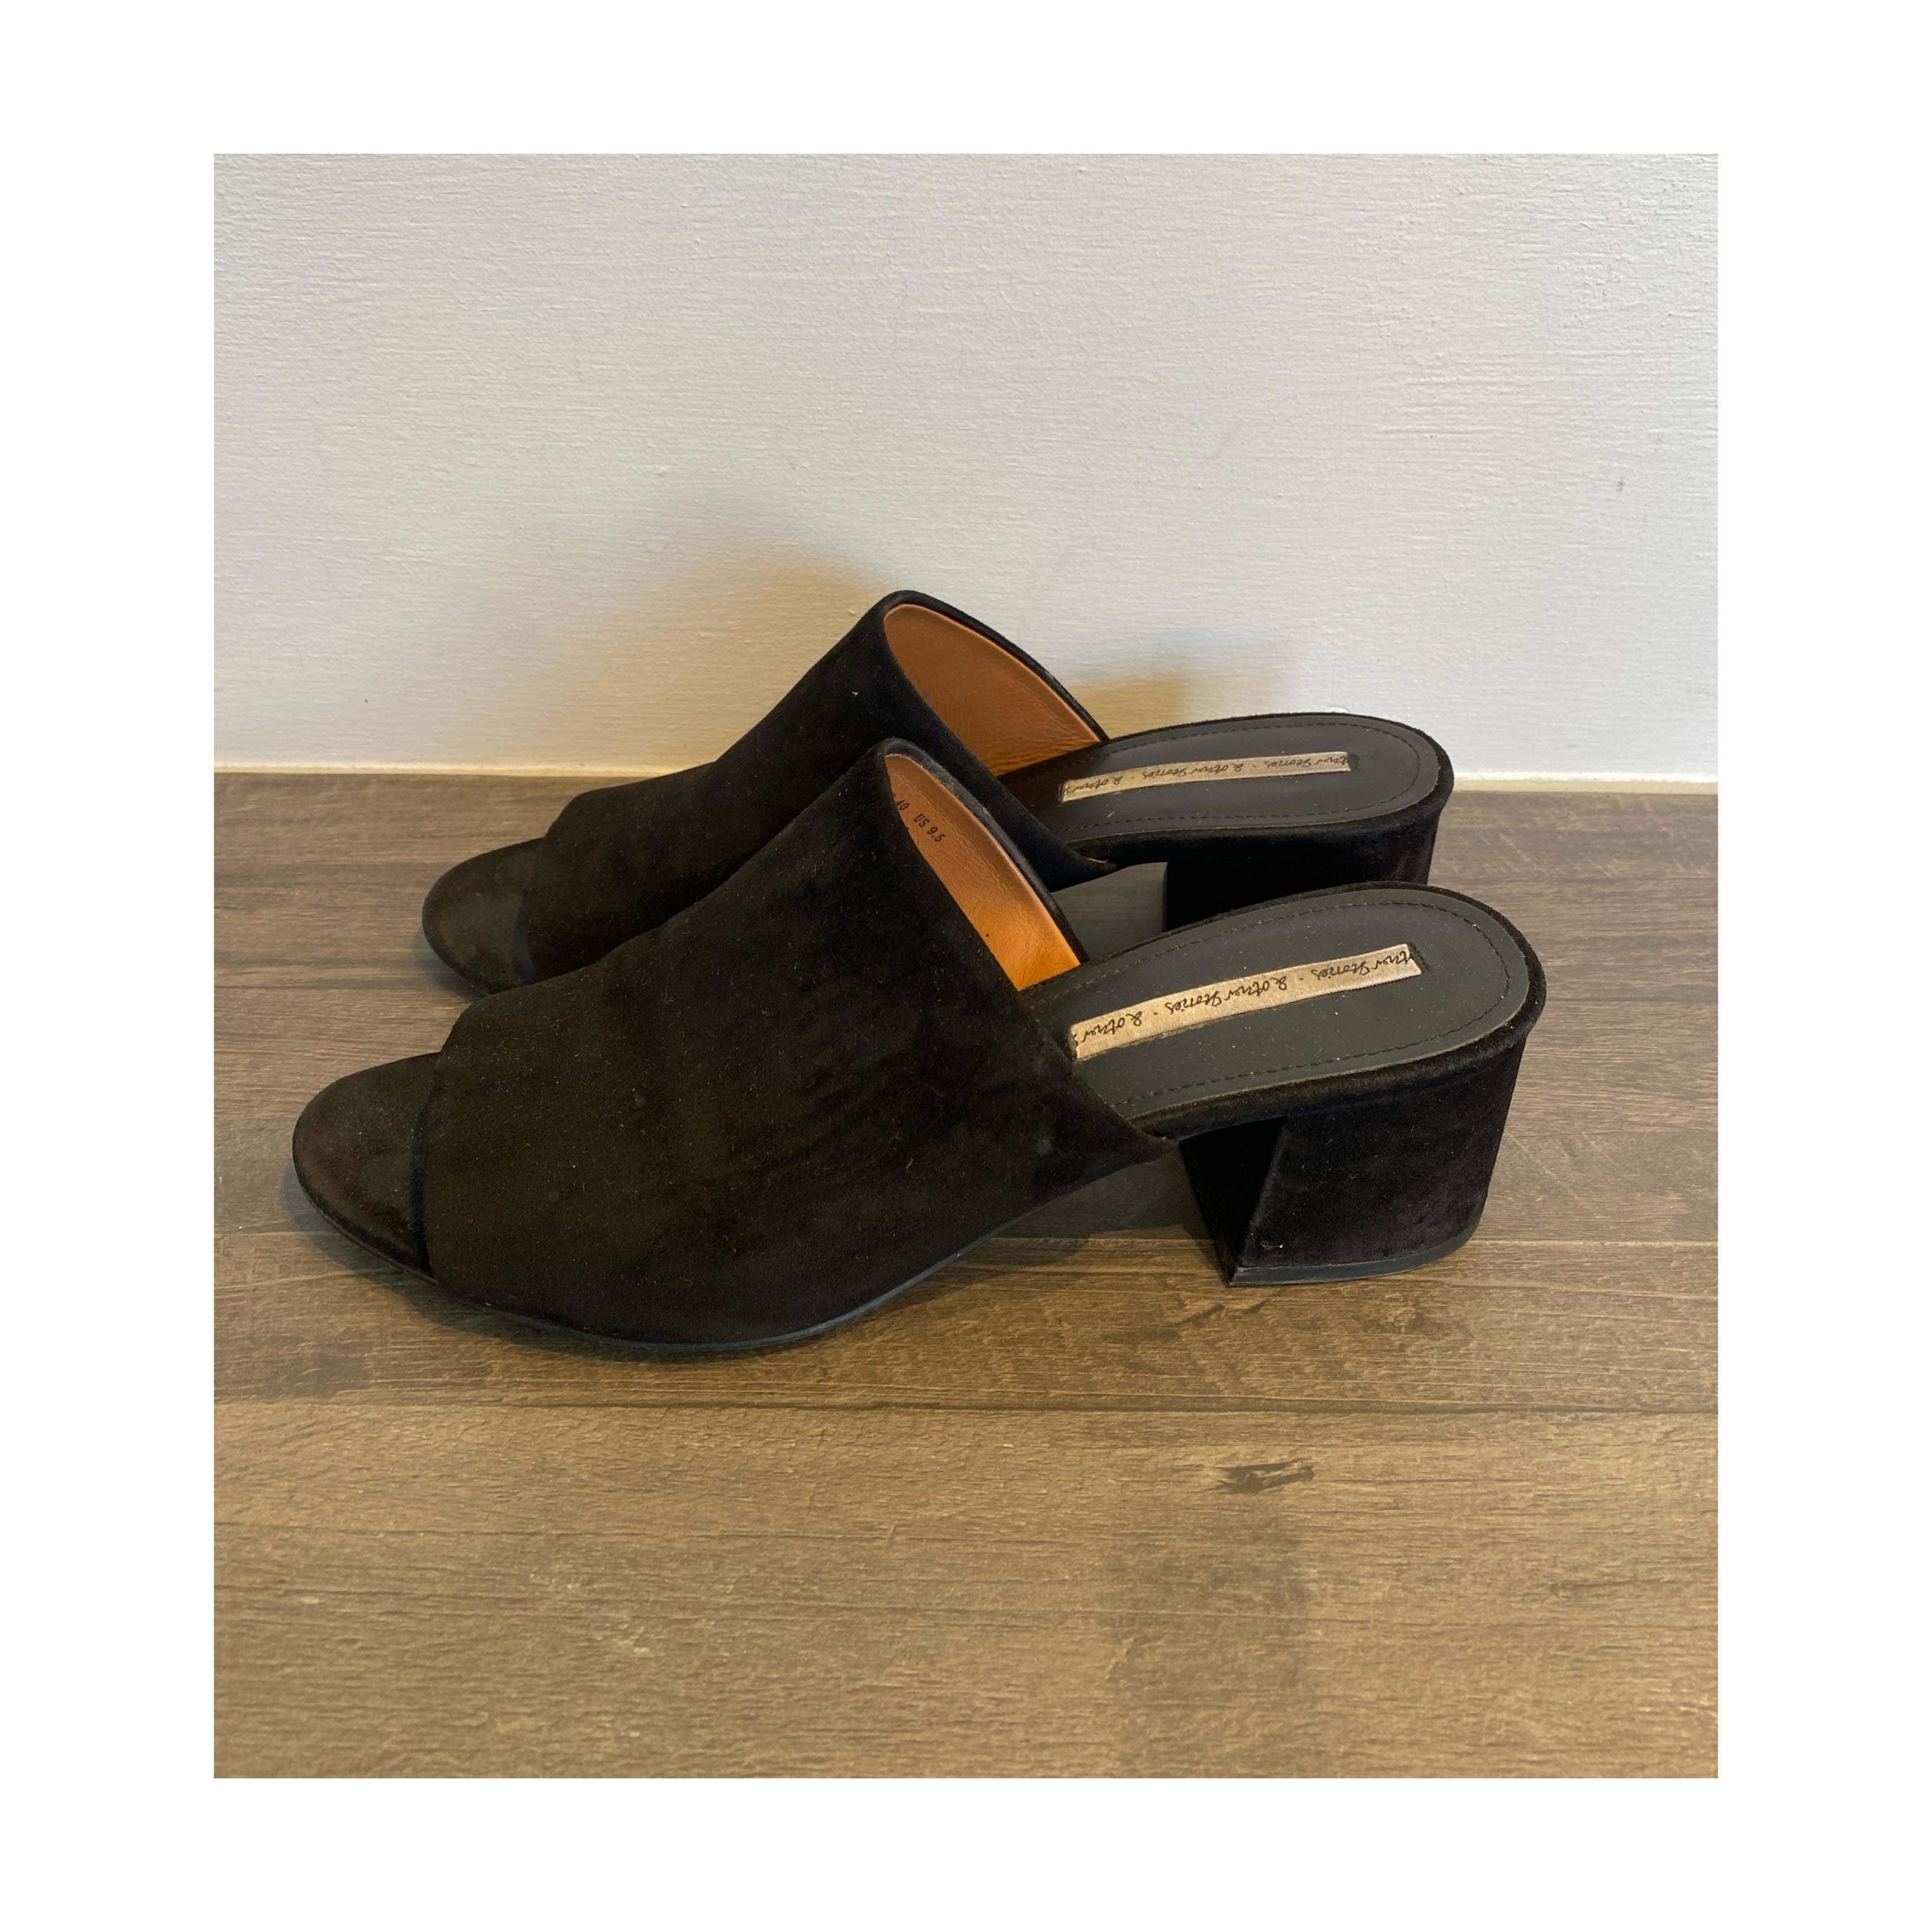 & Other Stories - Mules - Size: 40